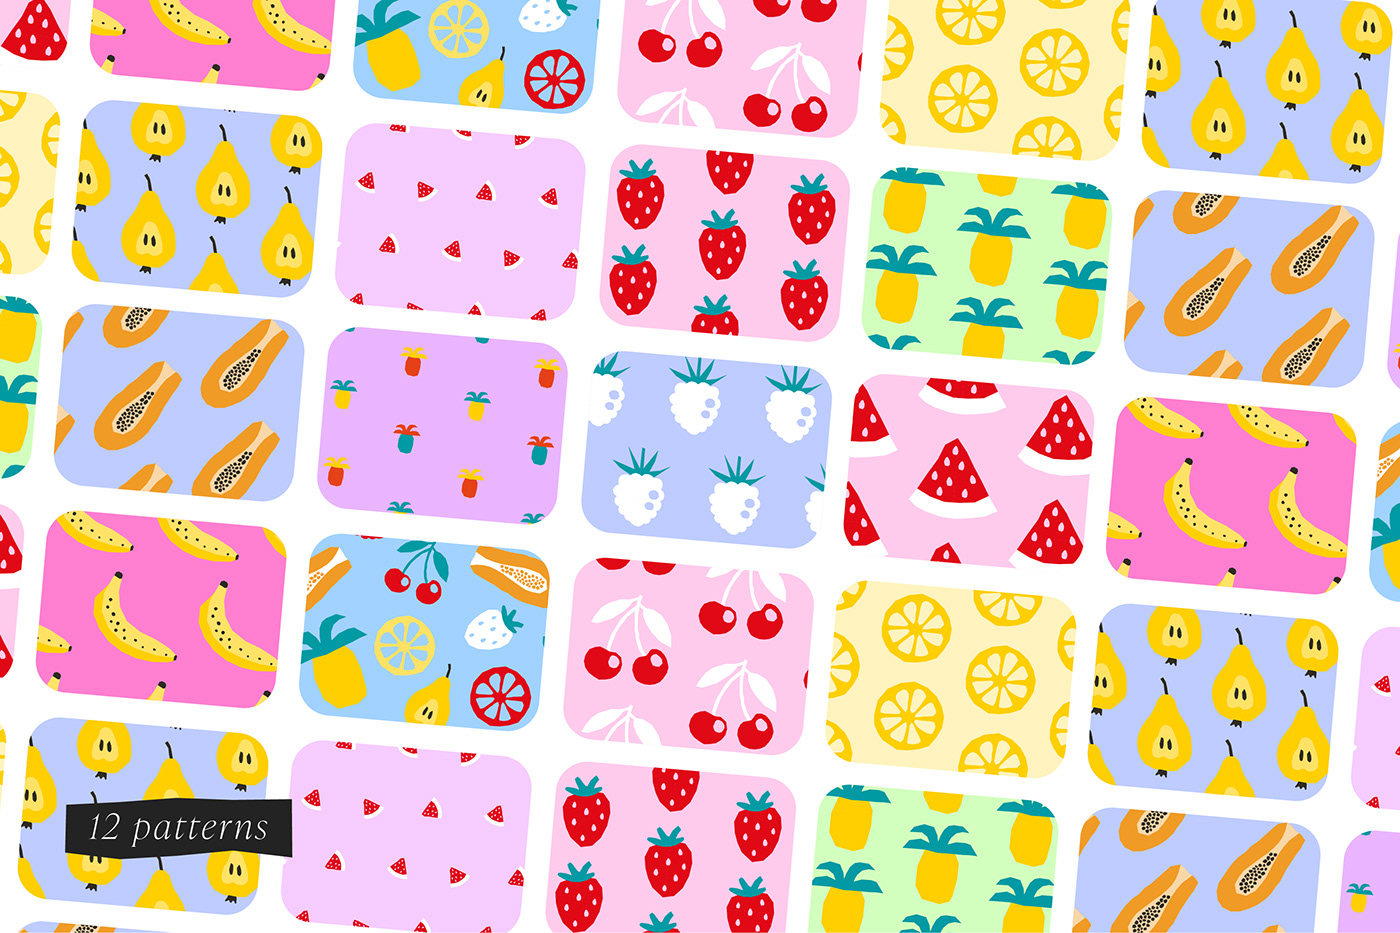 Colorful summer pattern design of fruits and berries